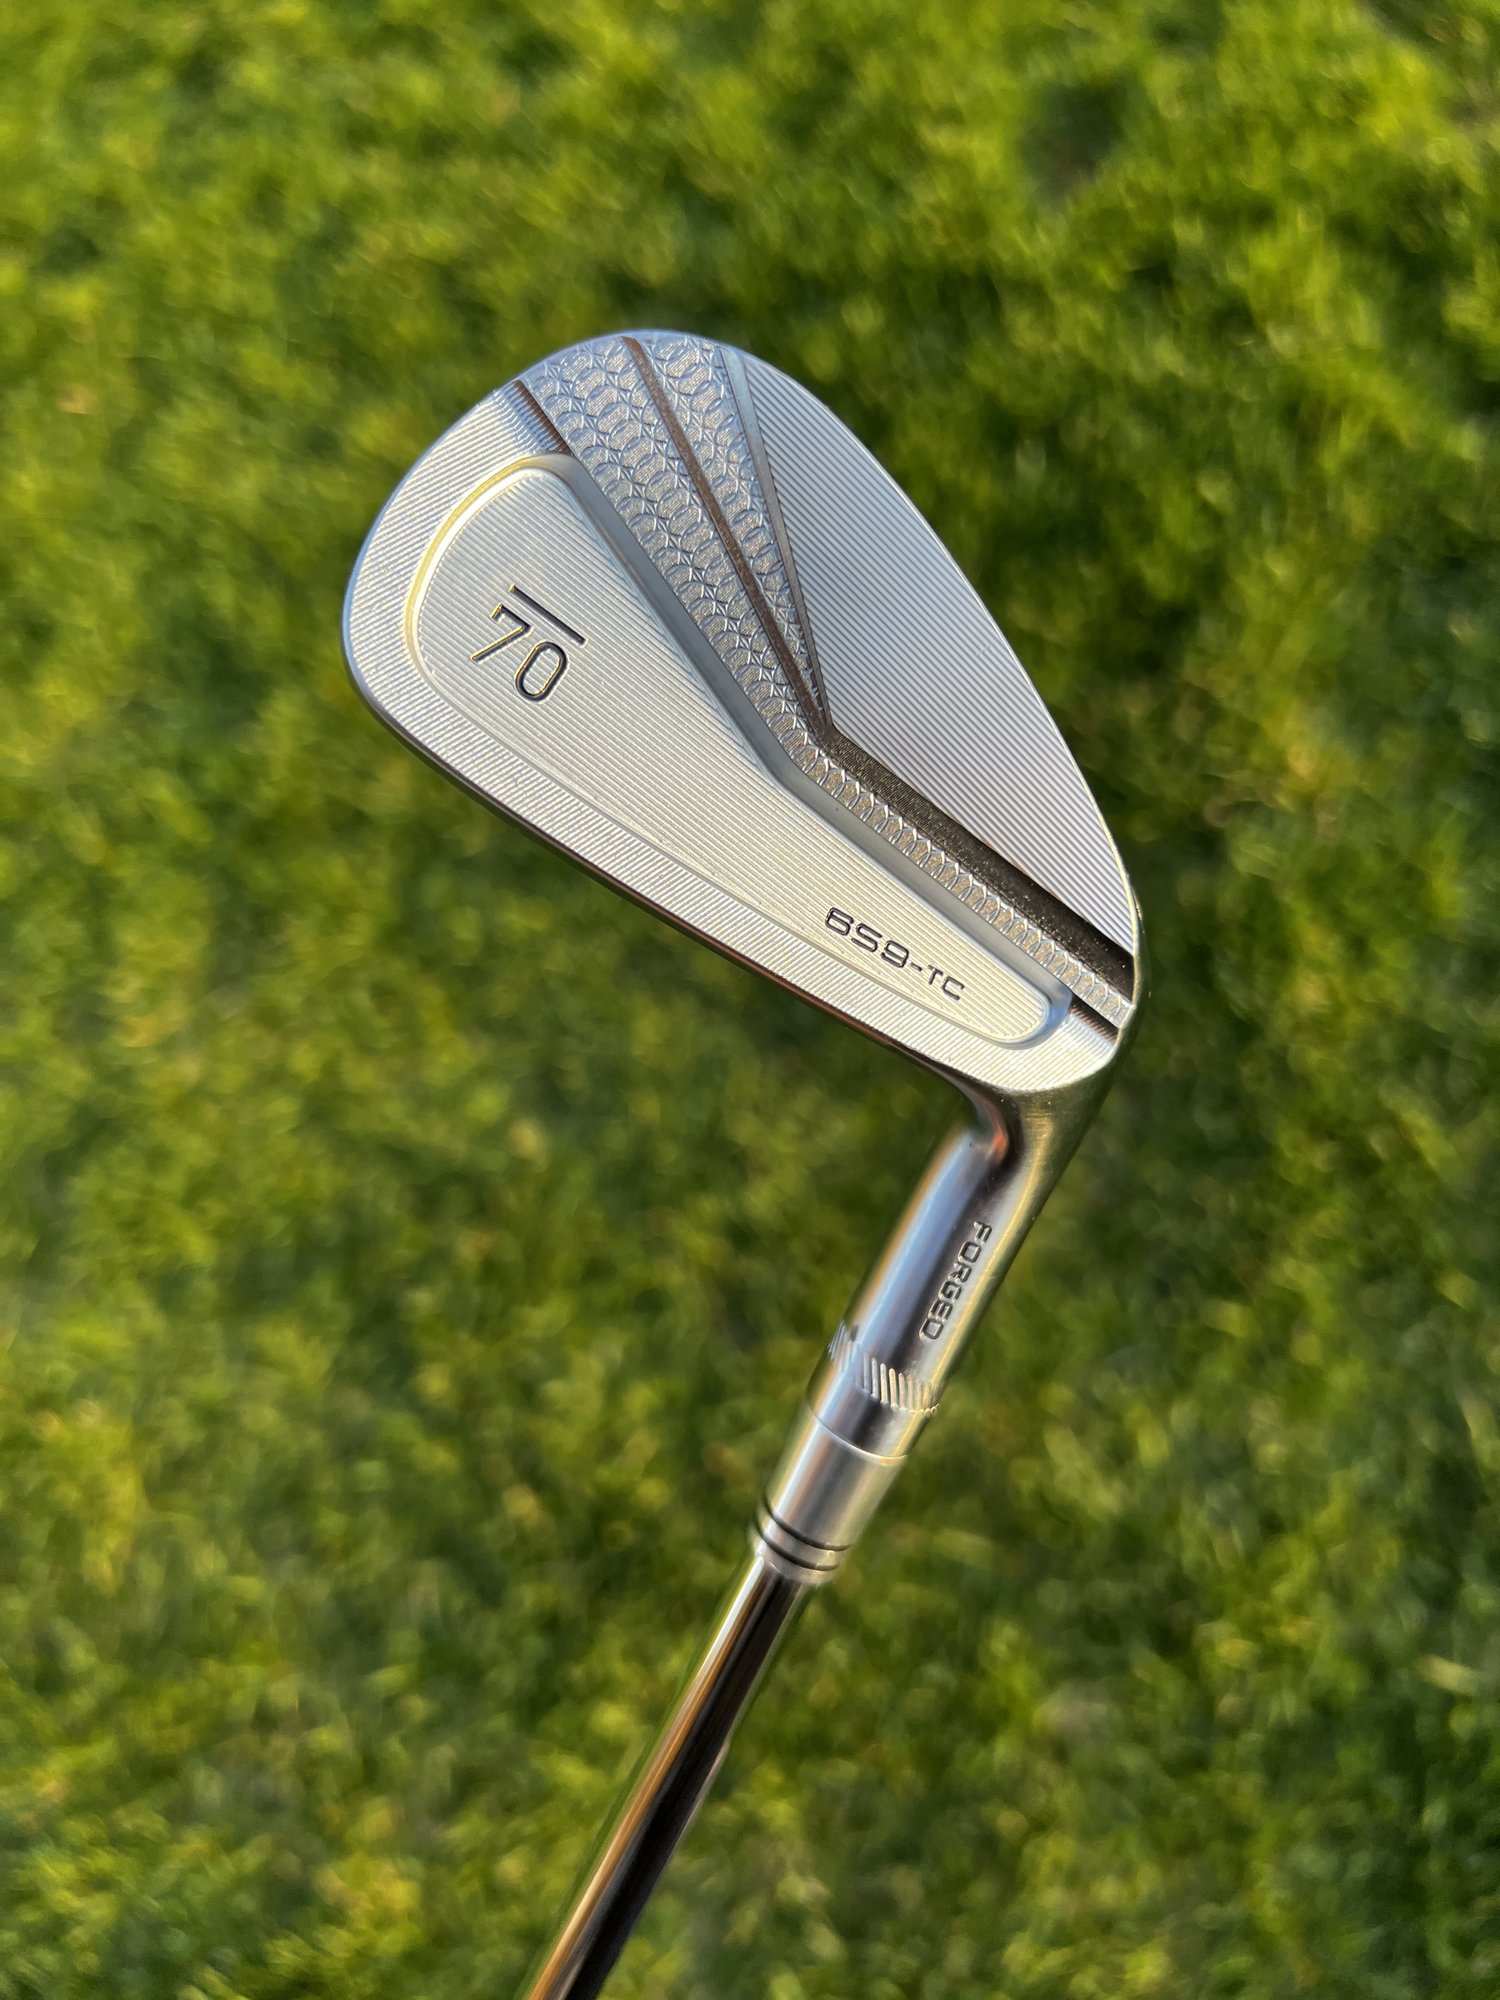 Sub 70 659 TC Forged Irons Review